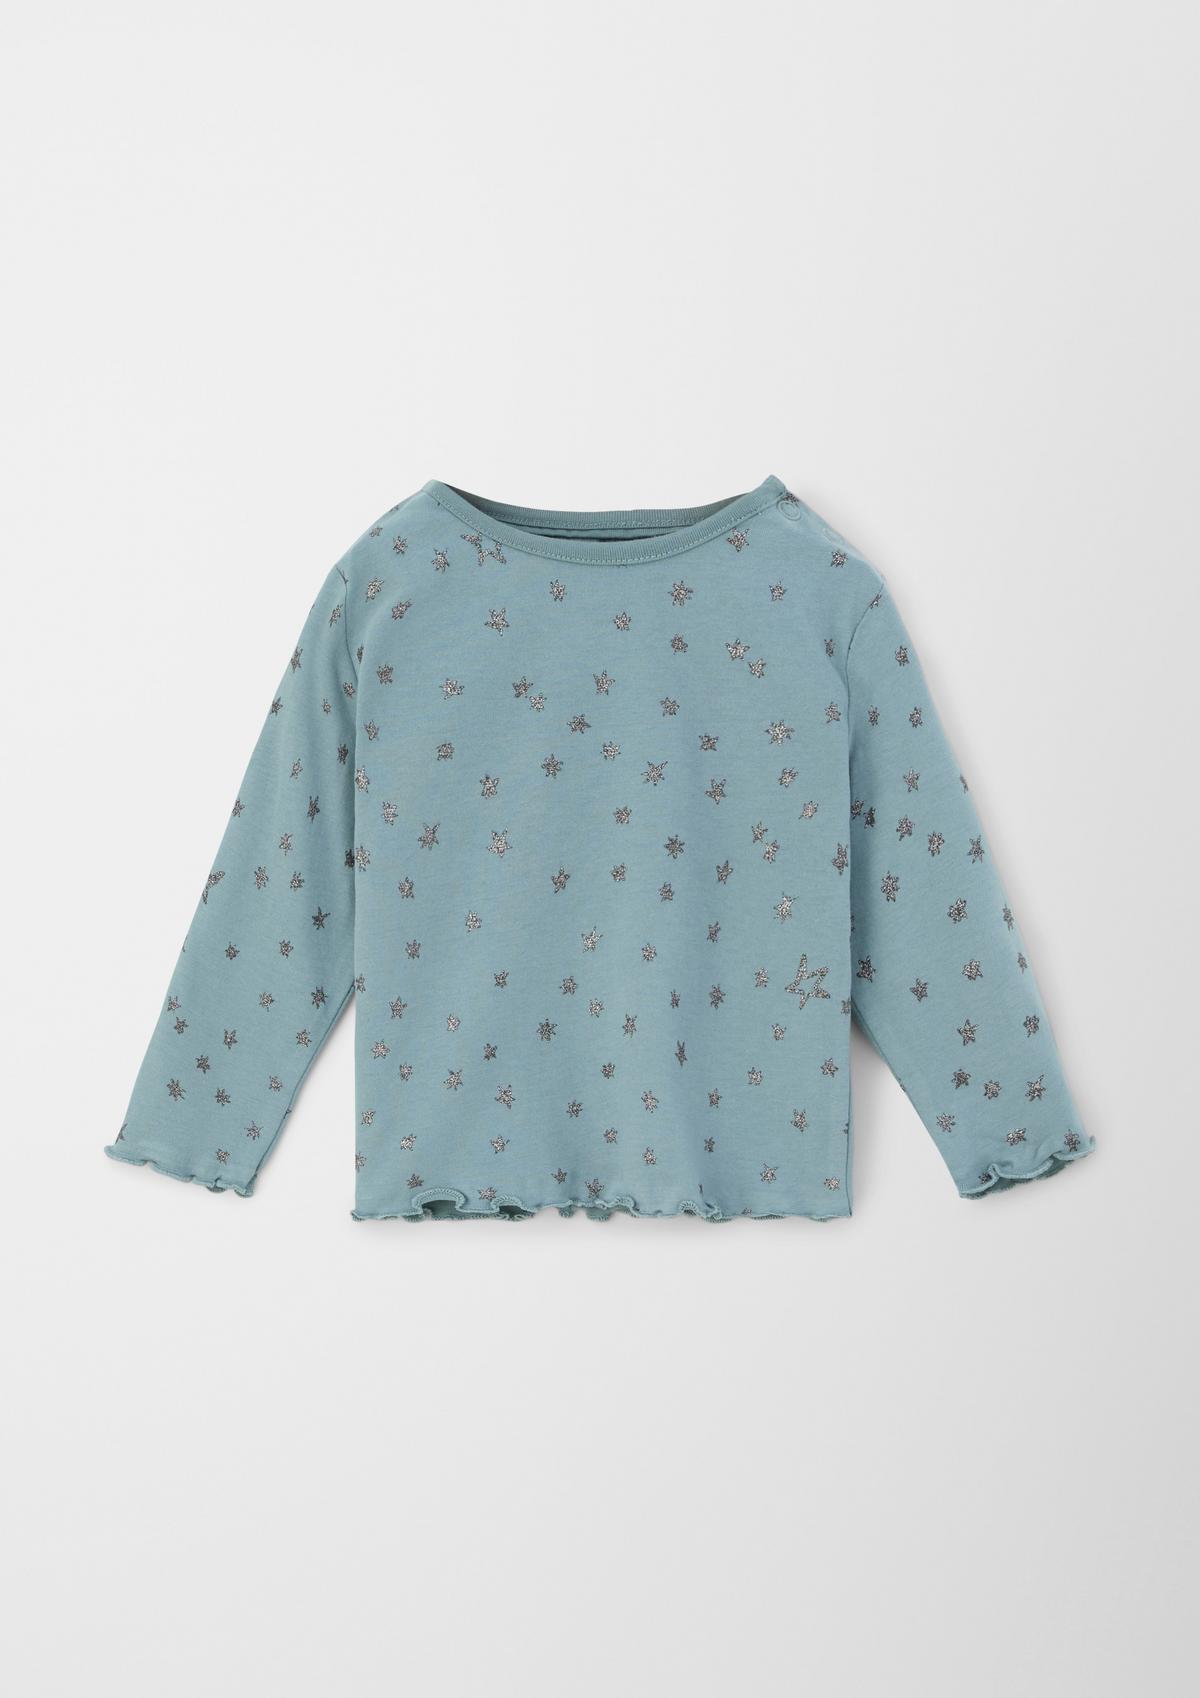 s.Oliver Long sleeve top with an all-over glitter print